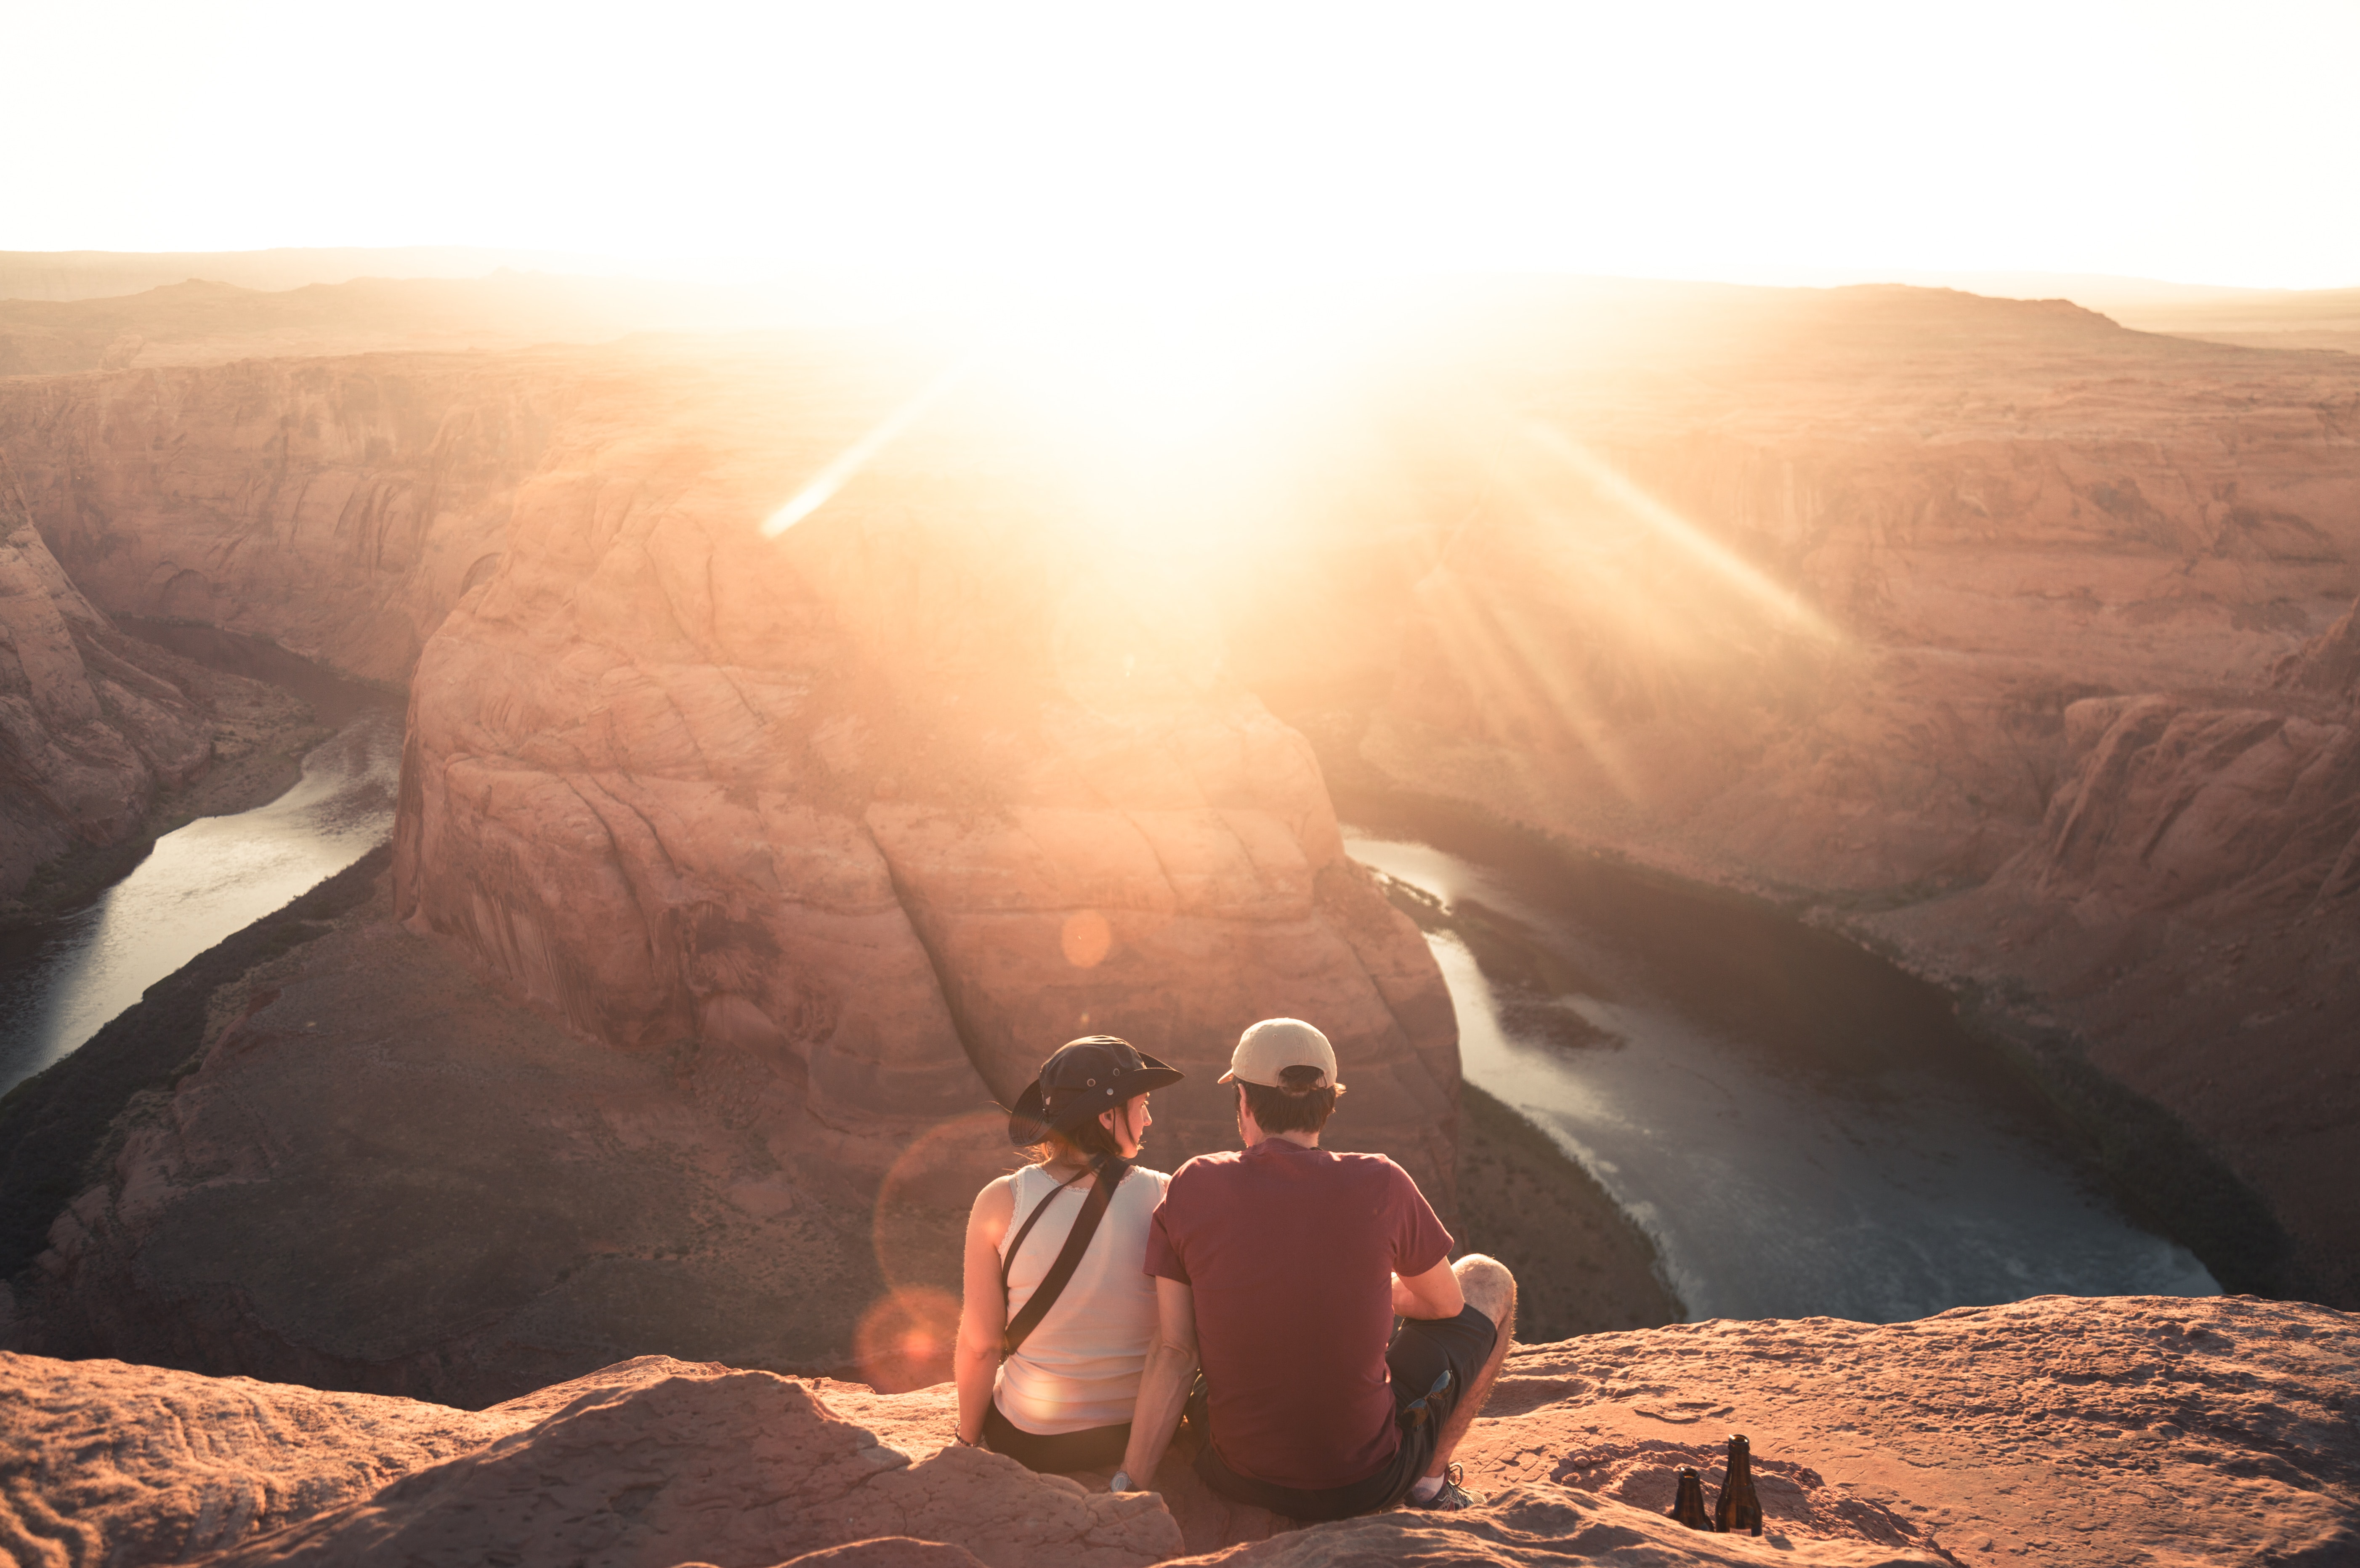 A photo of a man and a woman sitting on rock formation | Source: Unsplash